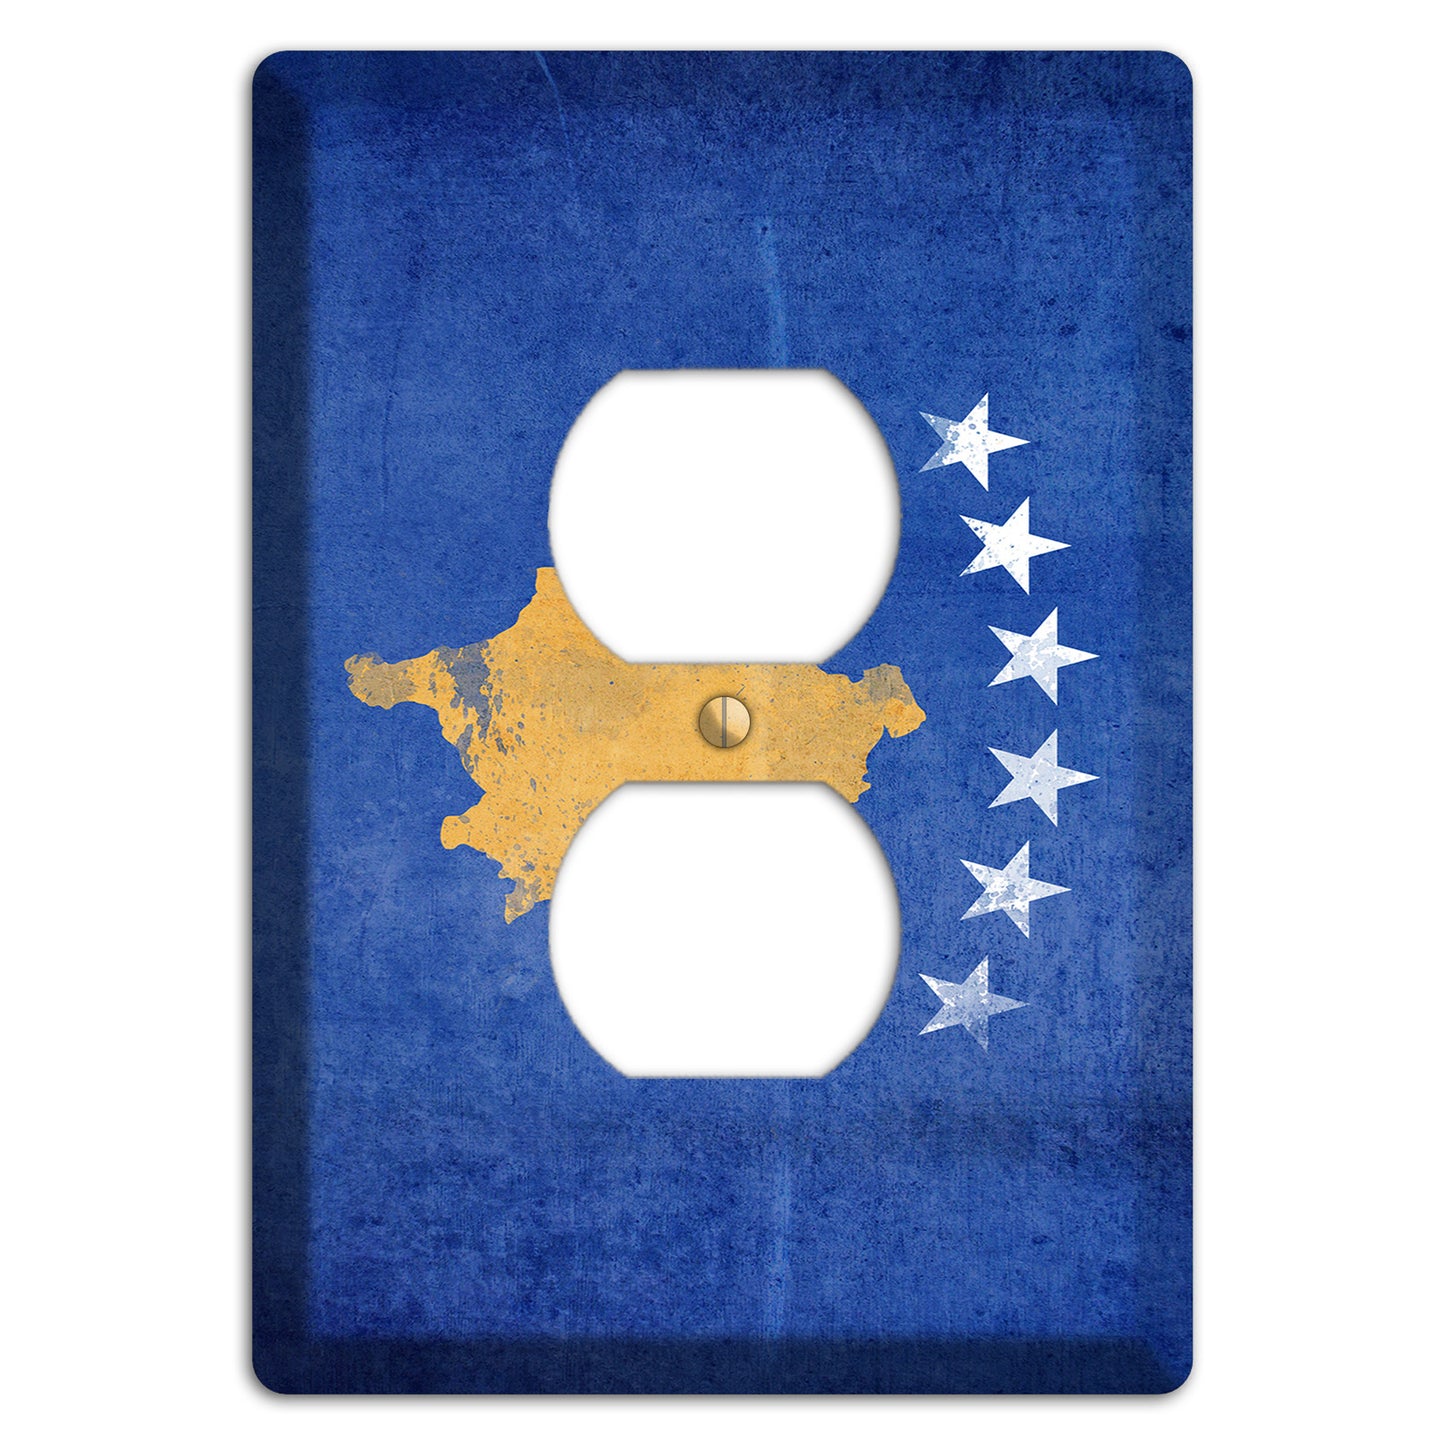 Kosovo Cover Plates Duplex Outlet Wallplate